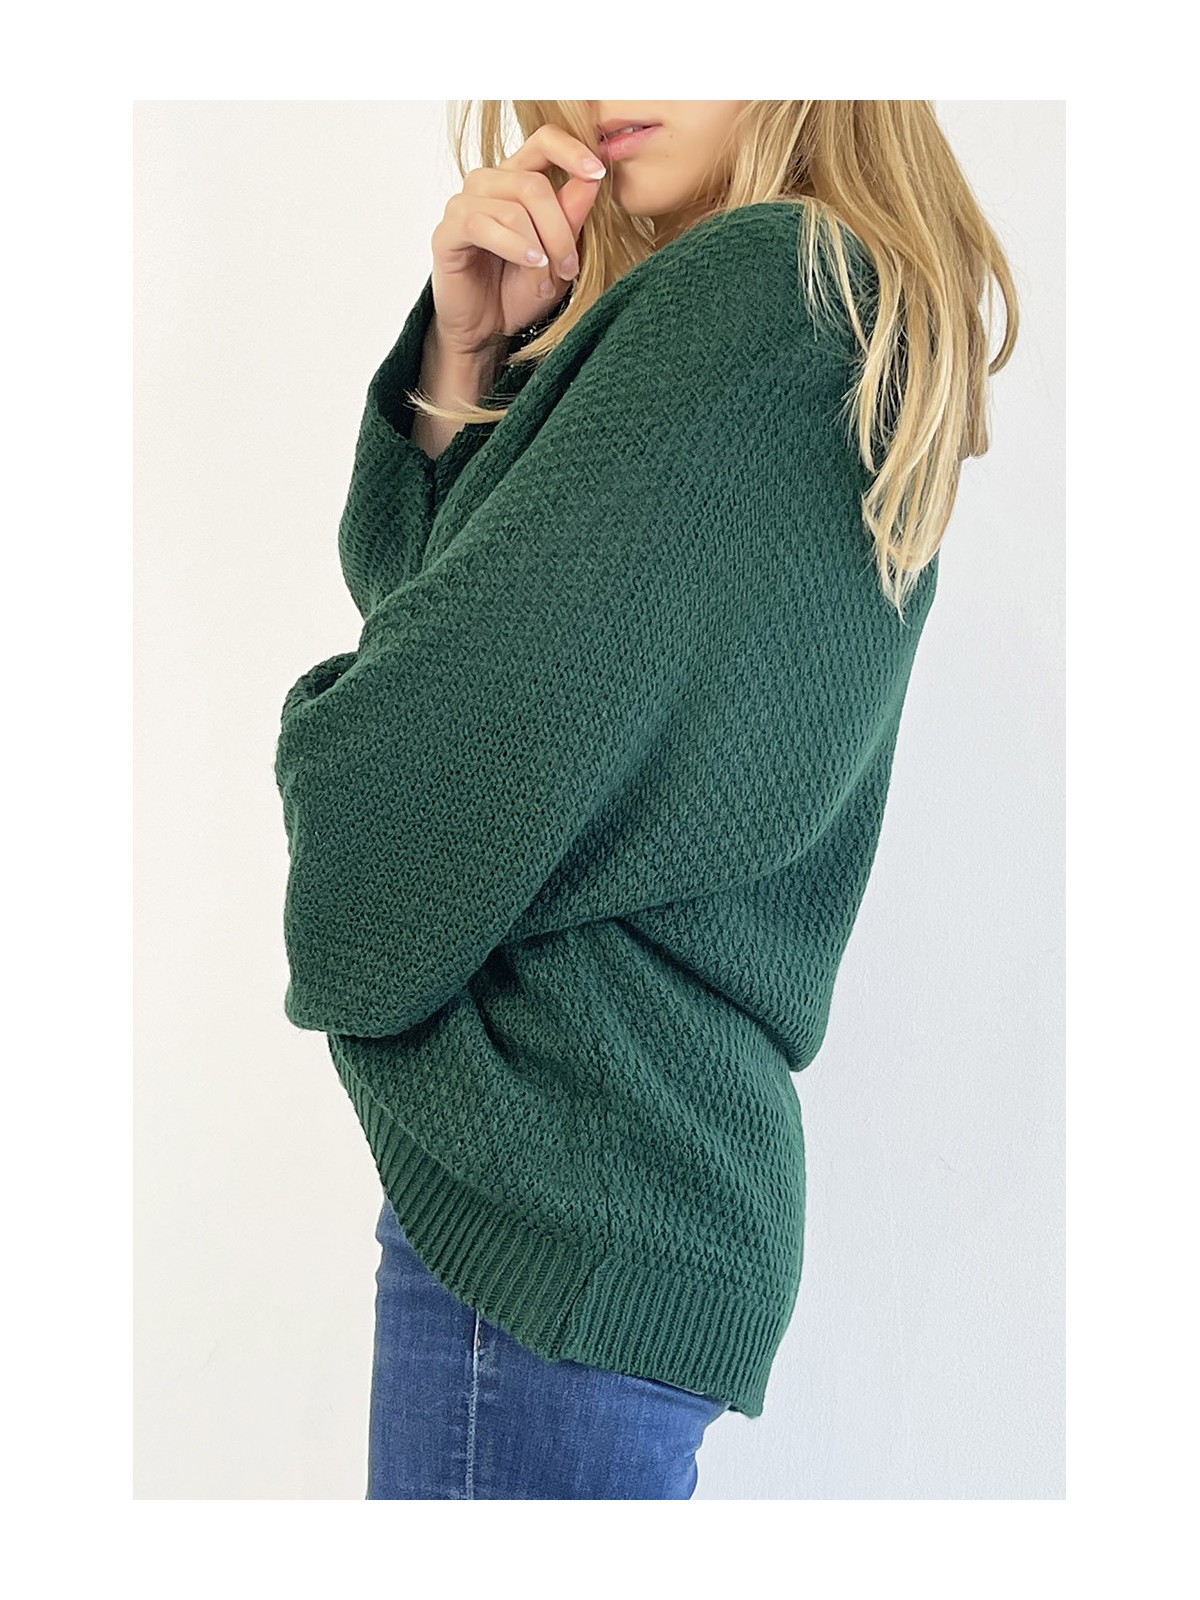 PuLL vert ample col V effet maille avec collier style bohème chic - 6